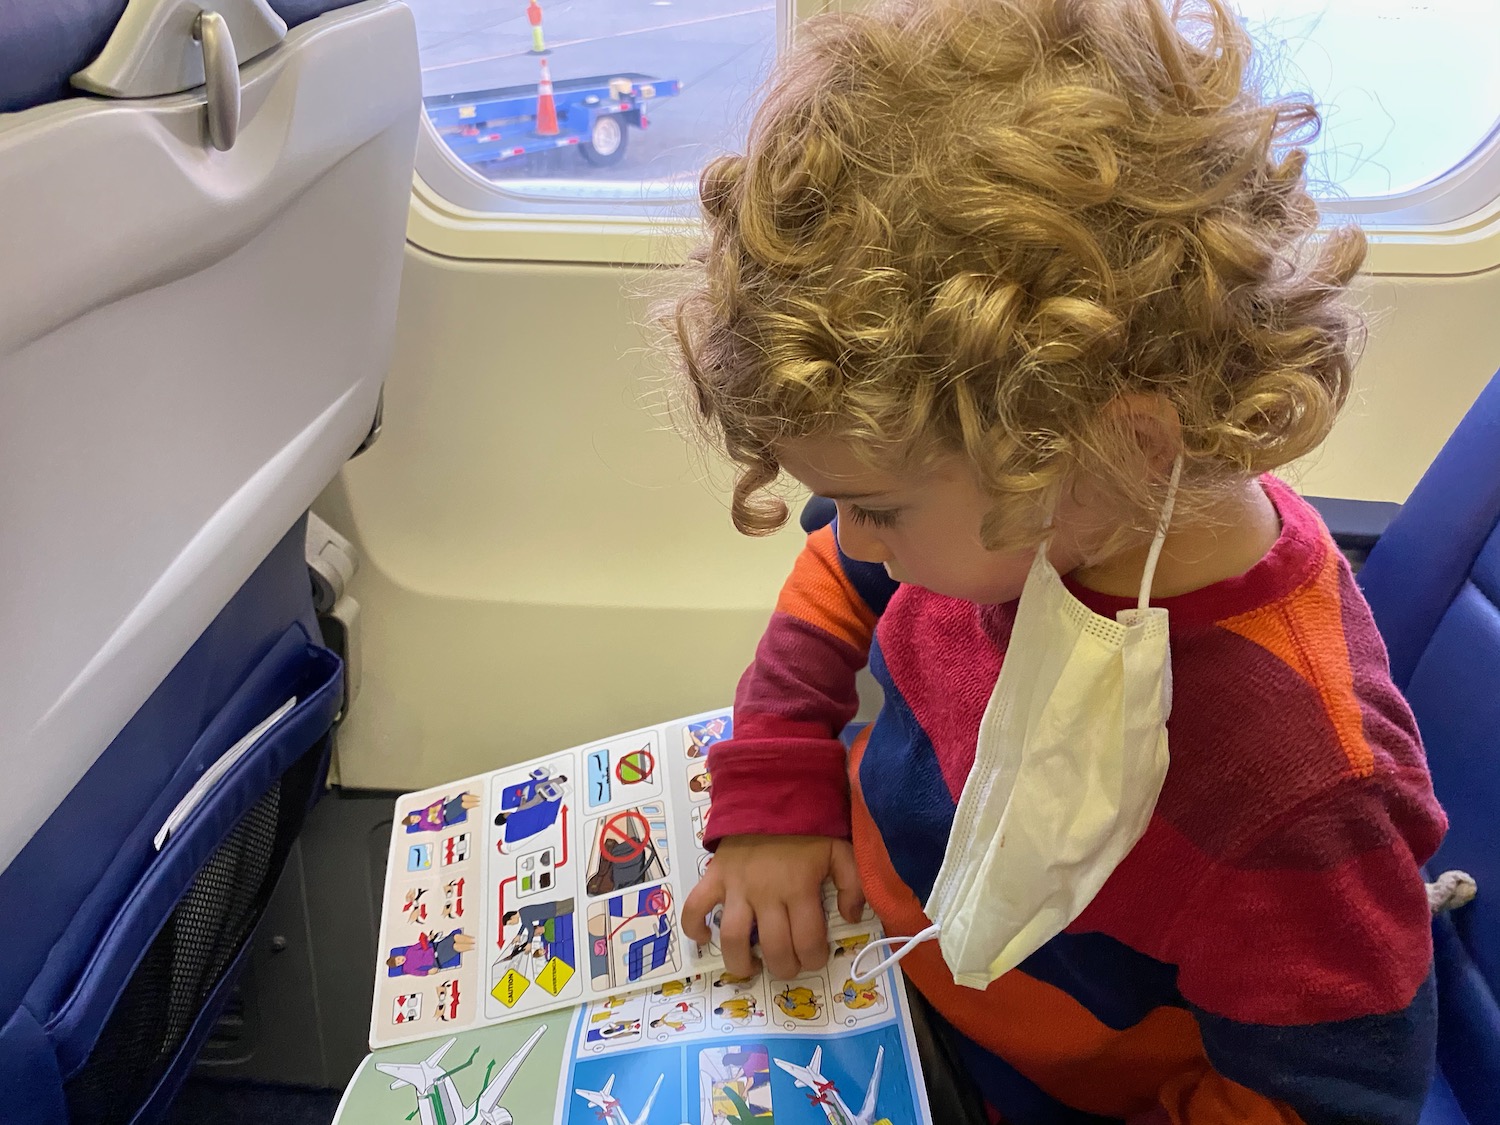 Southwest Kicks Off Autistic Three-Year-Old For Not Wearing Mask - Live and Let'..